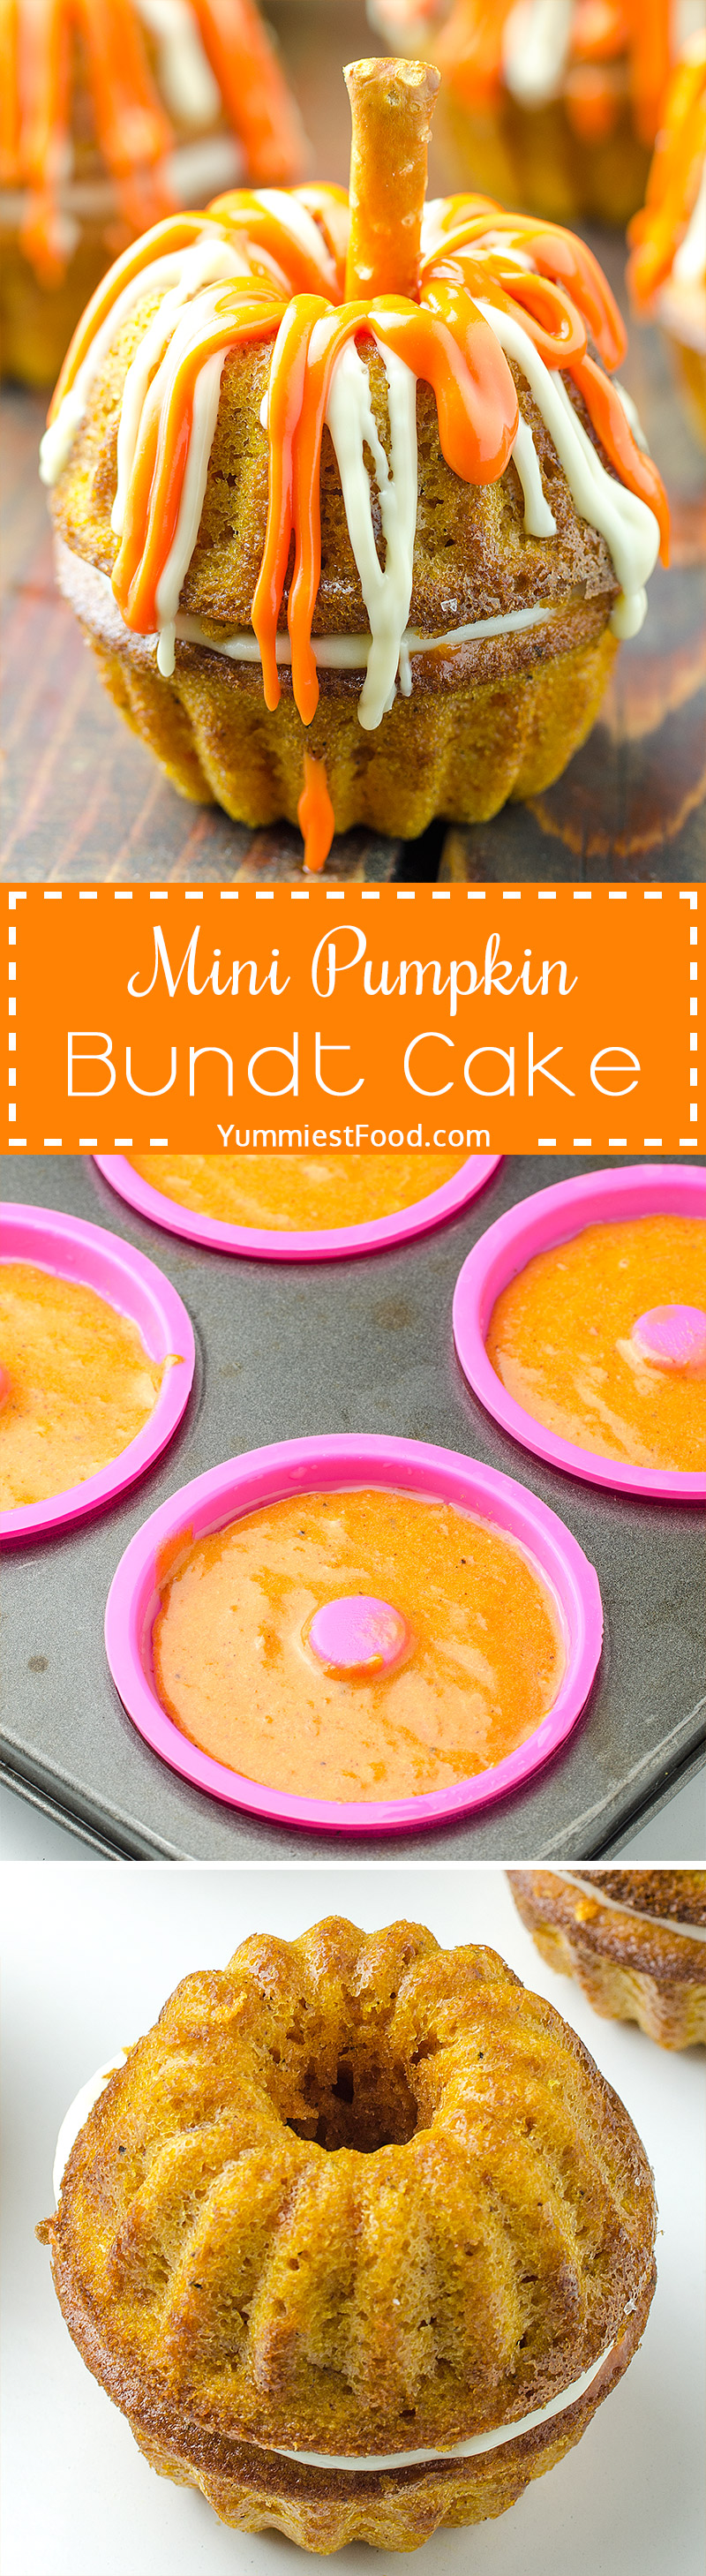 Mini Pumpkin Bundt Cake - A frighteningly delicious treat with pumpkin and cream cheese filling